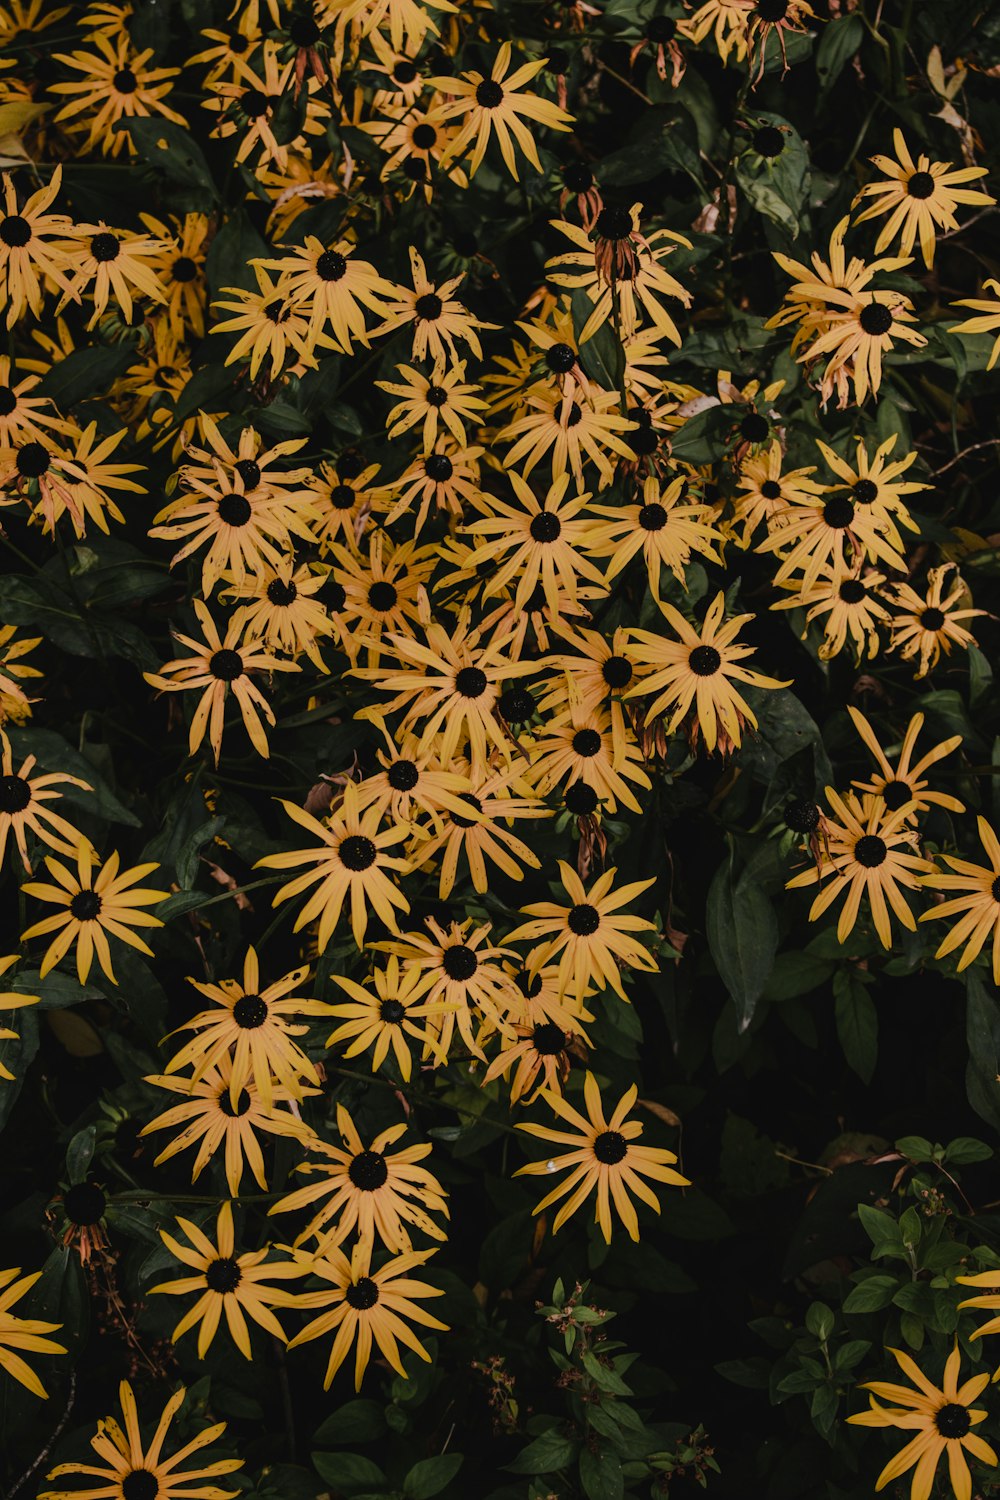 yellow and black flowers with green leaves